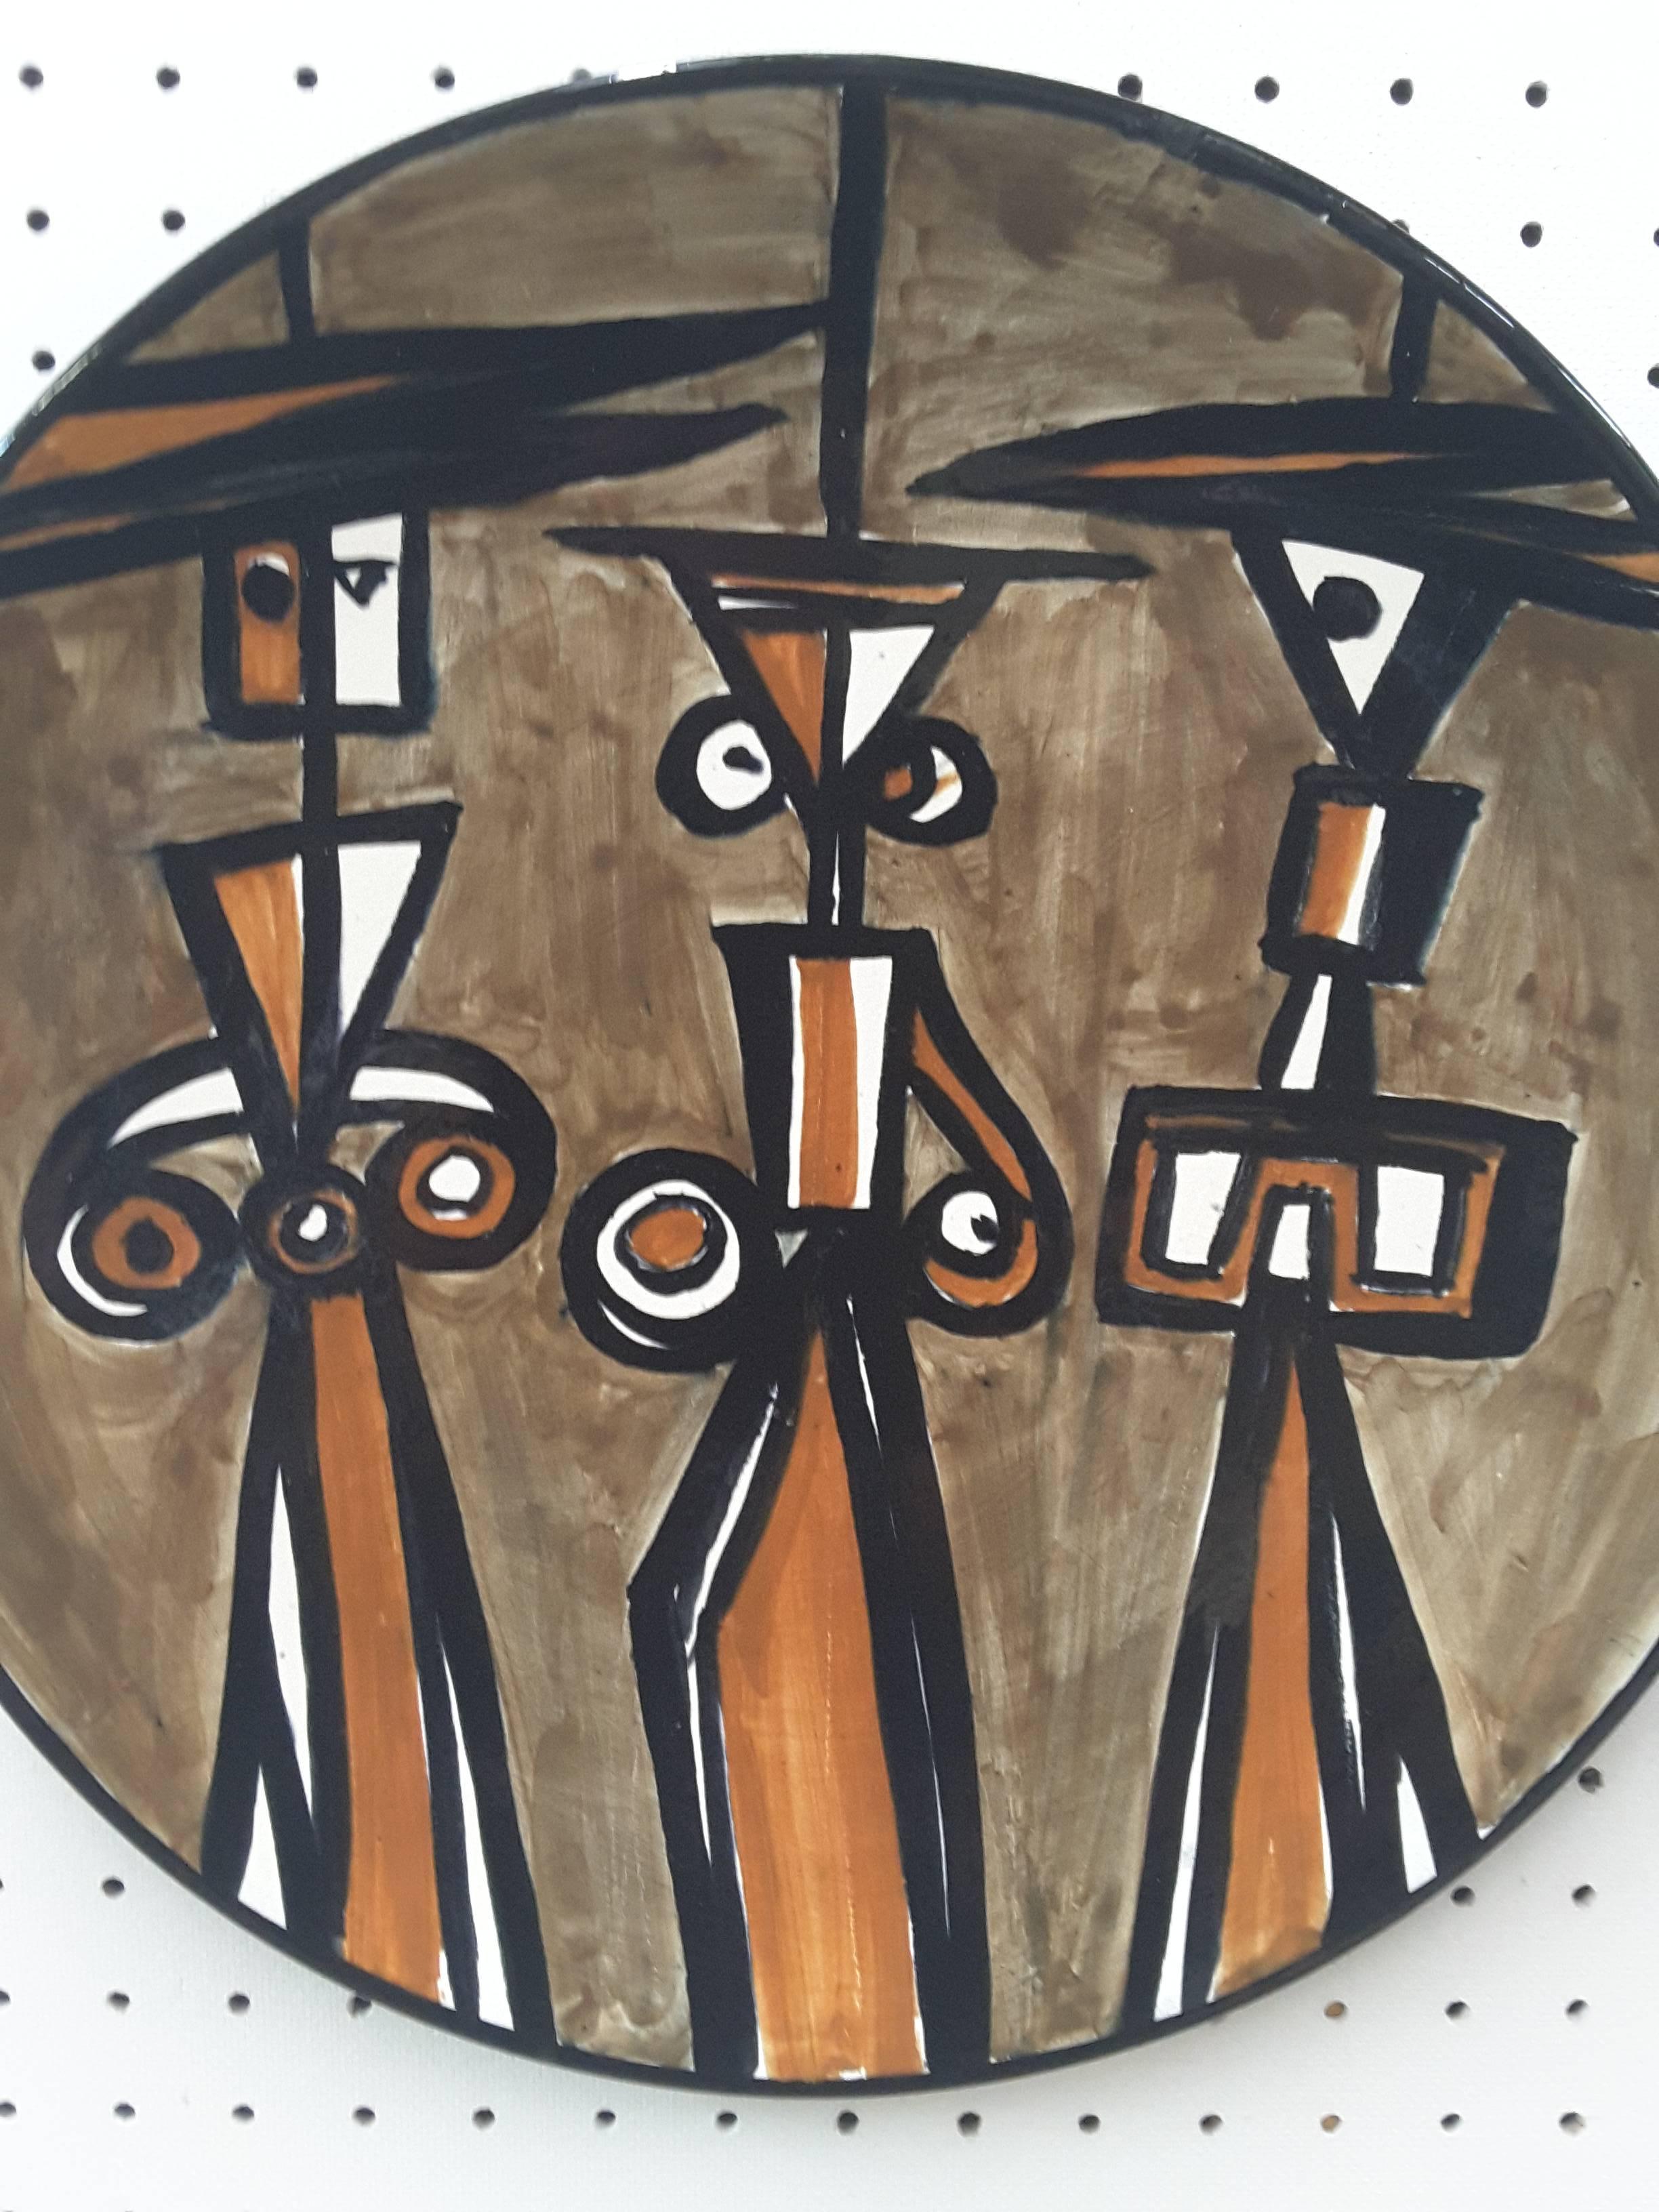 Picasso inspired 1959 polish signed 14 1/2" charger, a very nice Picasso style painted charger, artist signed, country of origin and dated by the artist, H Gtowozewski, Poland, 1959. The charger measures 14 1/2"inches in diameter and is